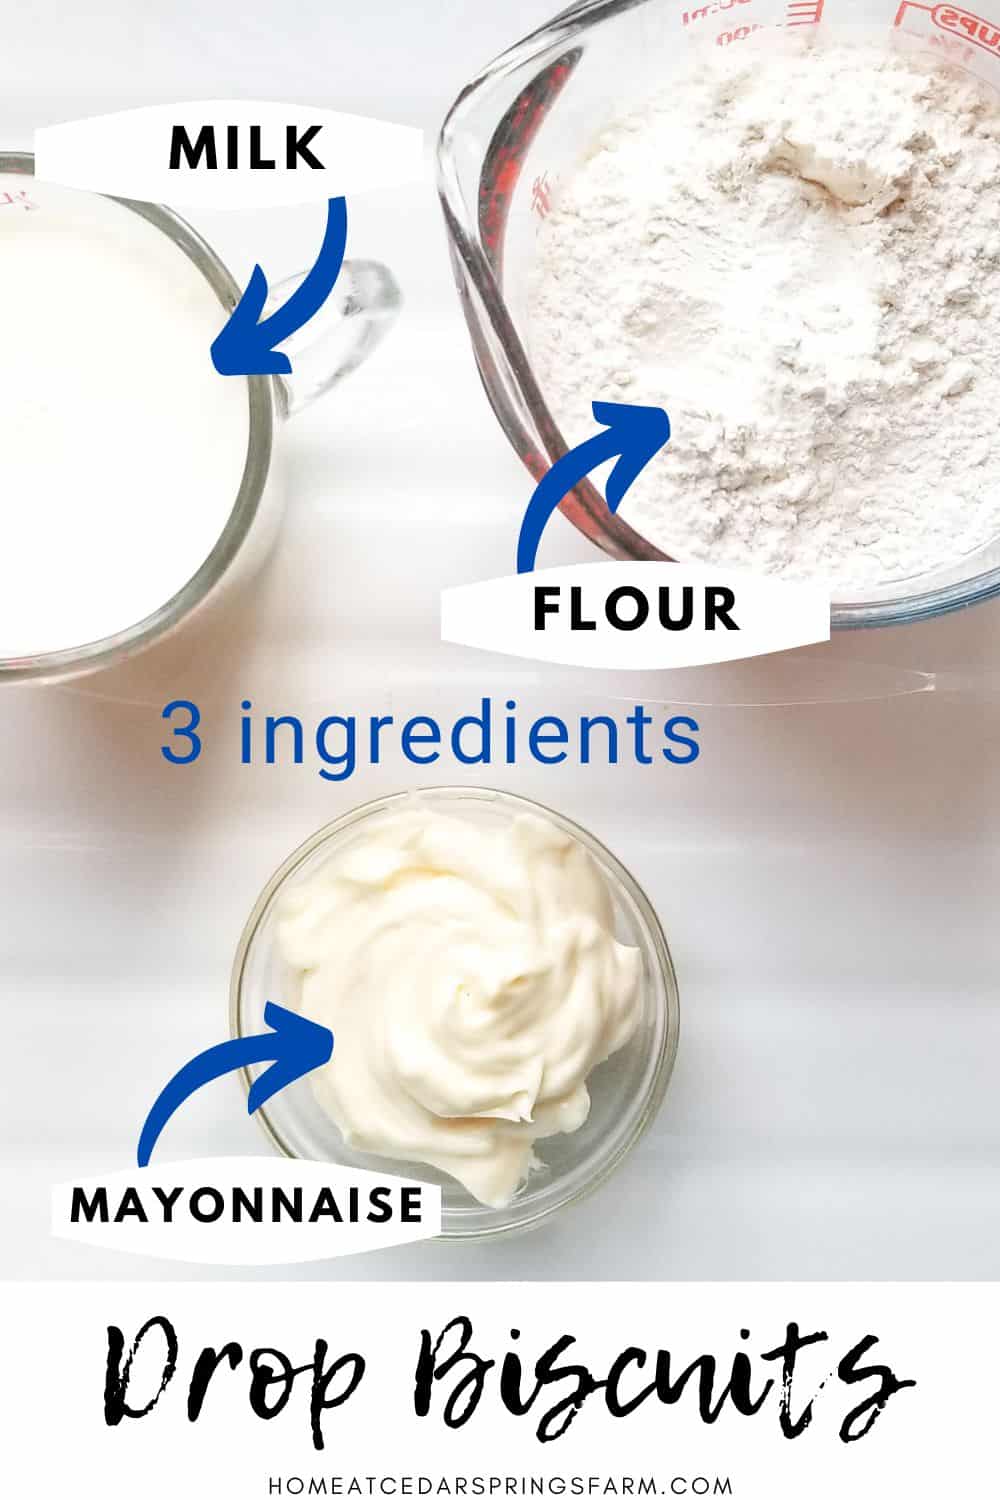 Ingredients needed for 3 ingredient drop biscuits with text overlay.